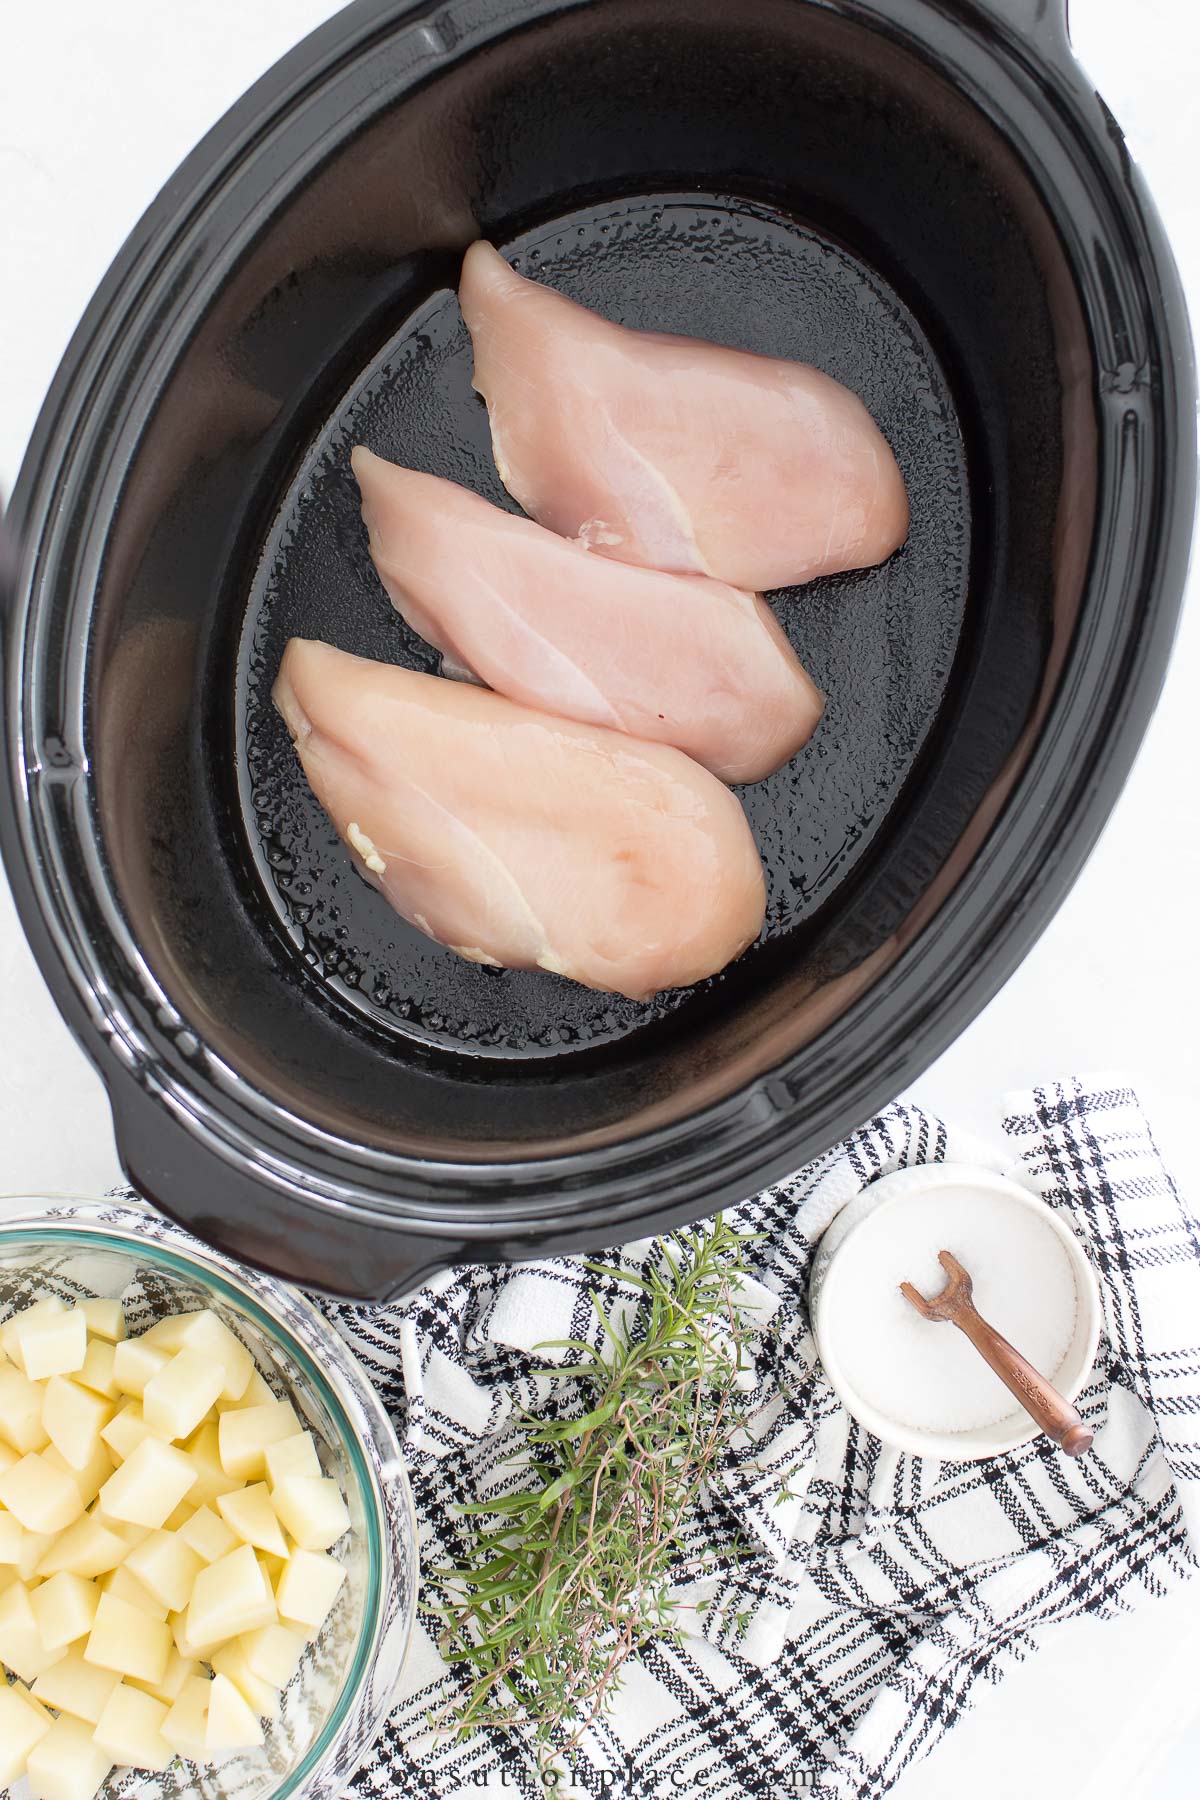 https://www.onsuttonplace.com/wp-content/uploads/2021/12/chicken-breasts-in-slow-cooker-insert.jpg